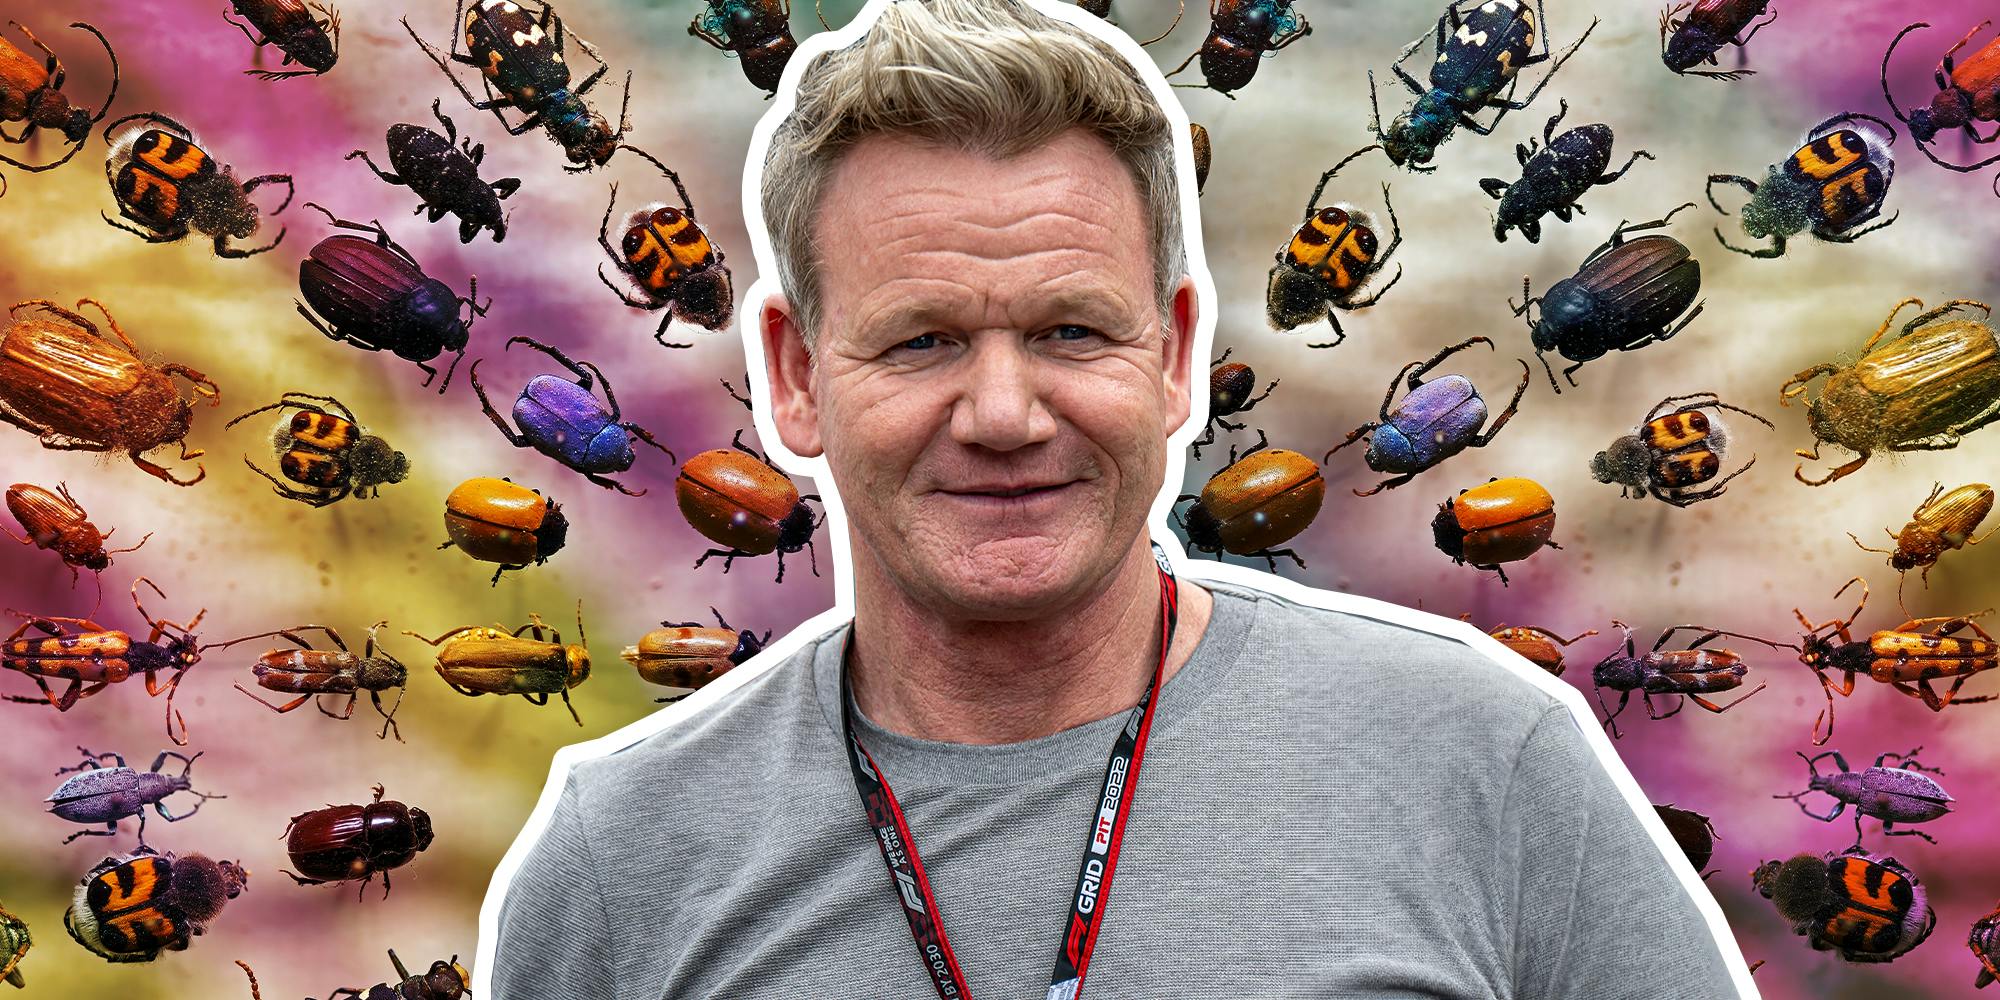 Gordon Ramsay protests globalist plan to feed world bugs